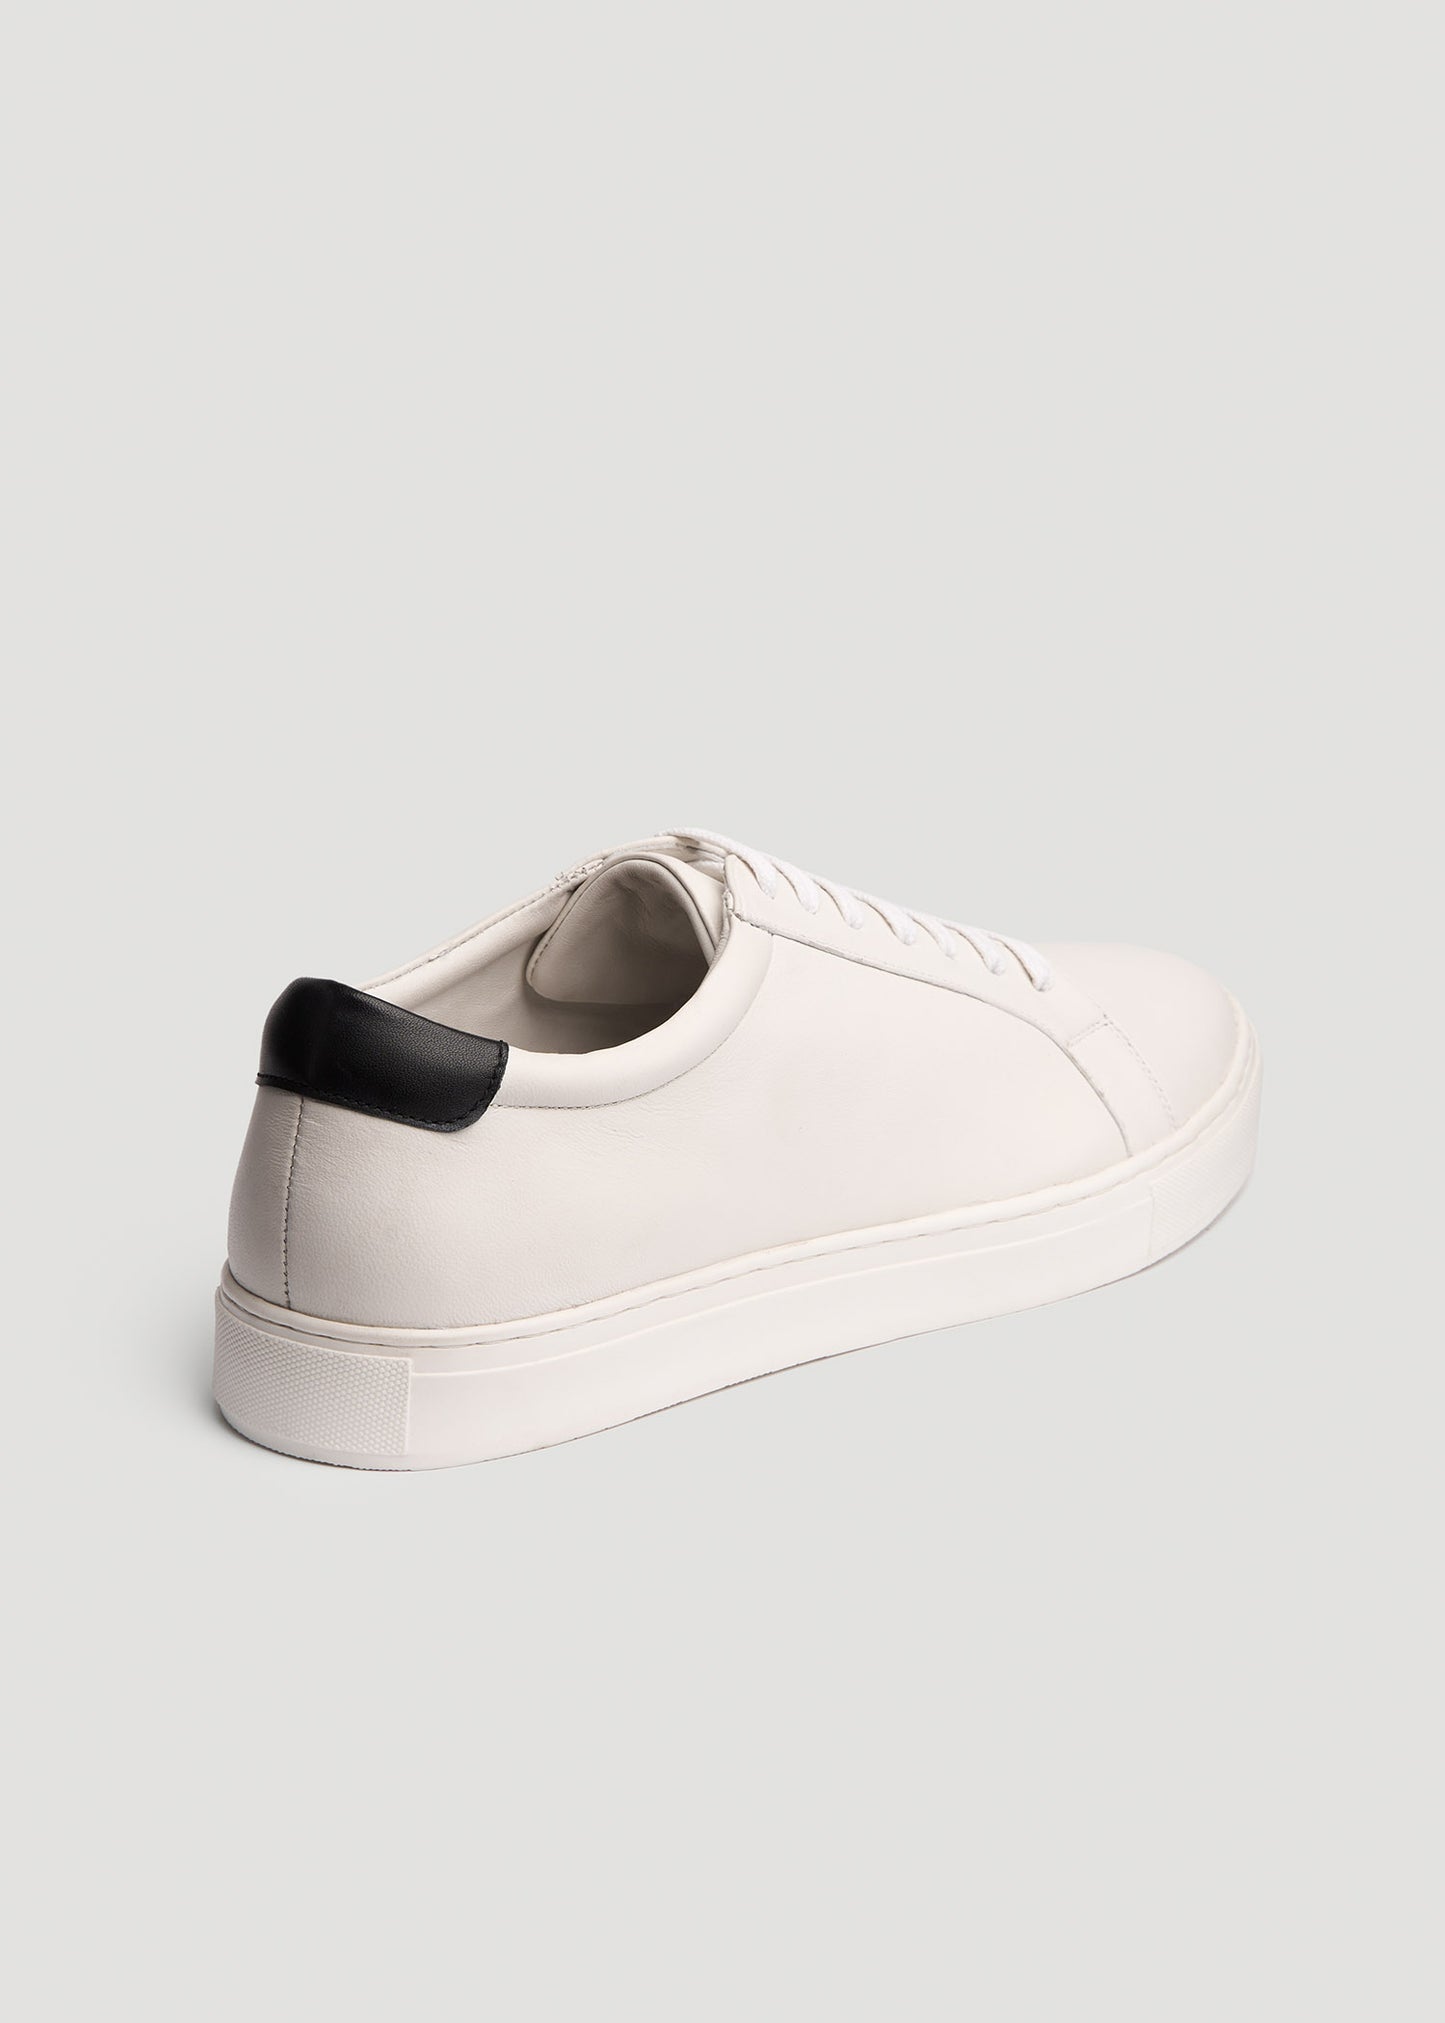 Tall Men’s Cupsole Tennis Sneakers in White